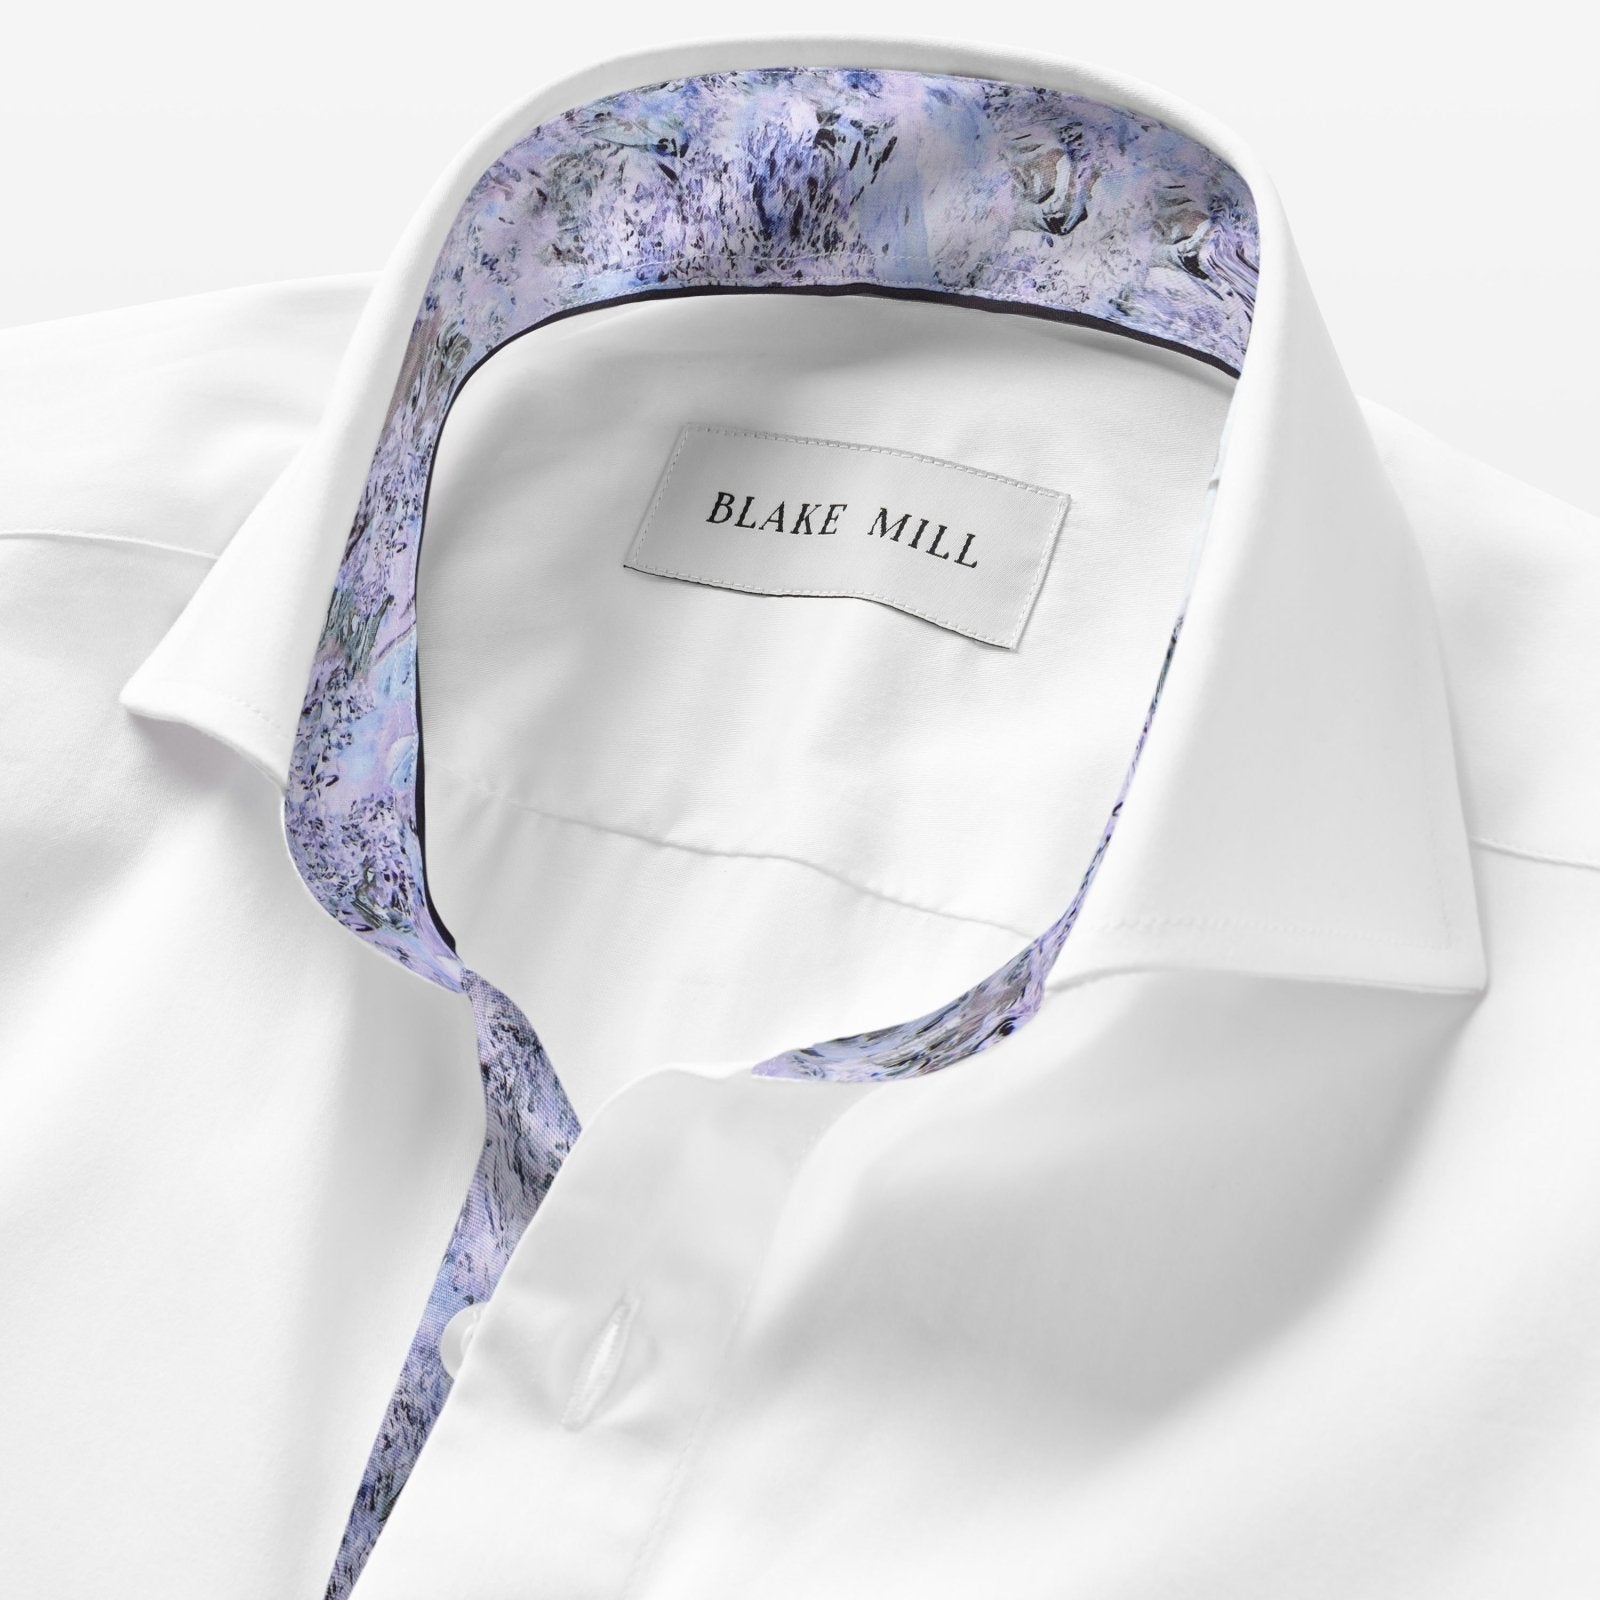 White with Times March Accents Shirt - Blake Mill